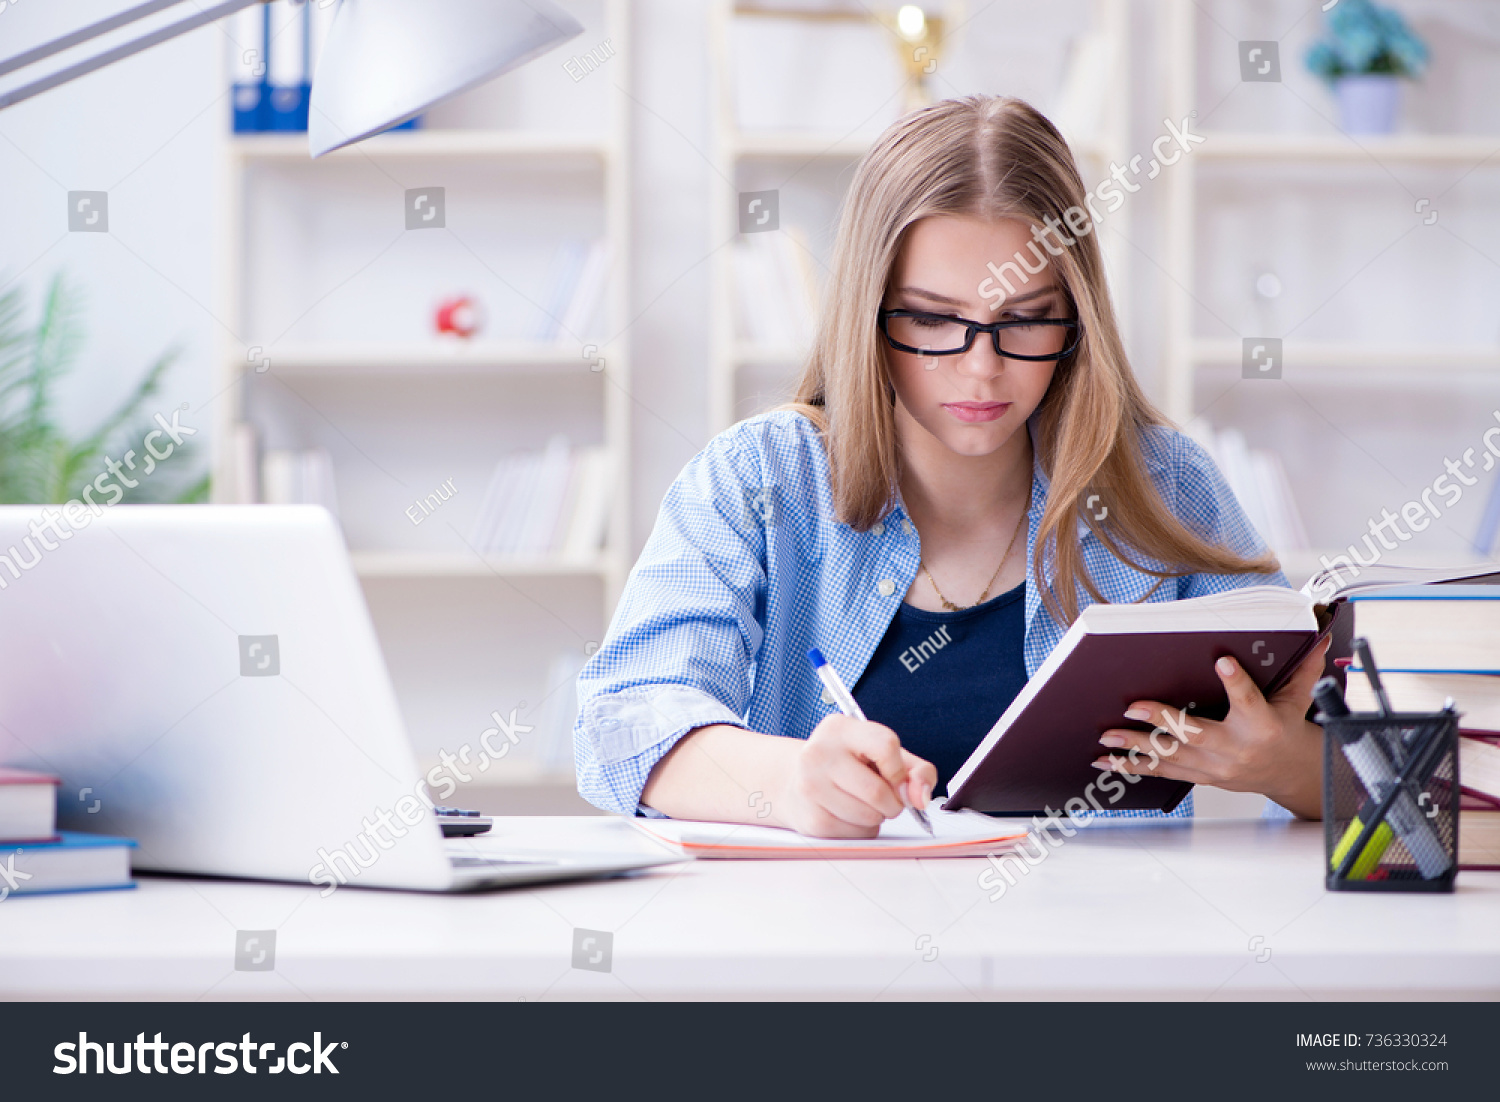 Young teenage female student preparing for exams at home #736330324